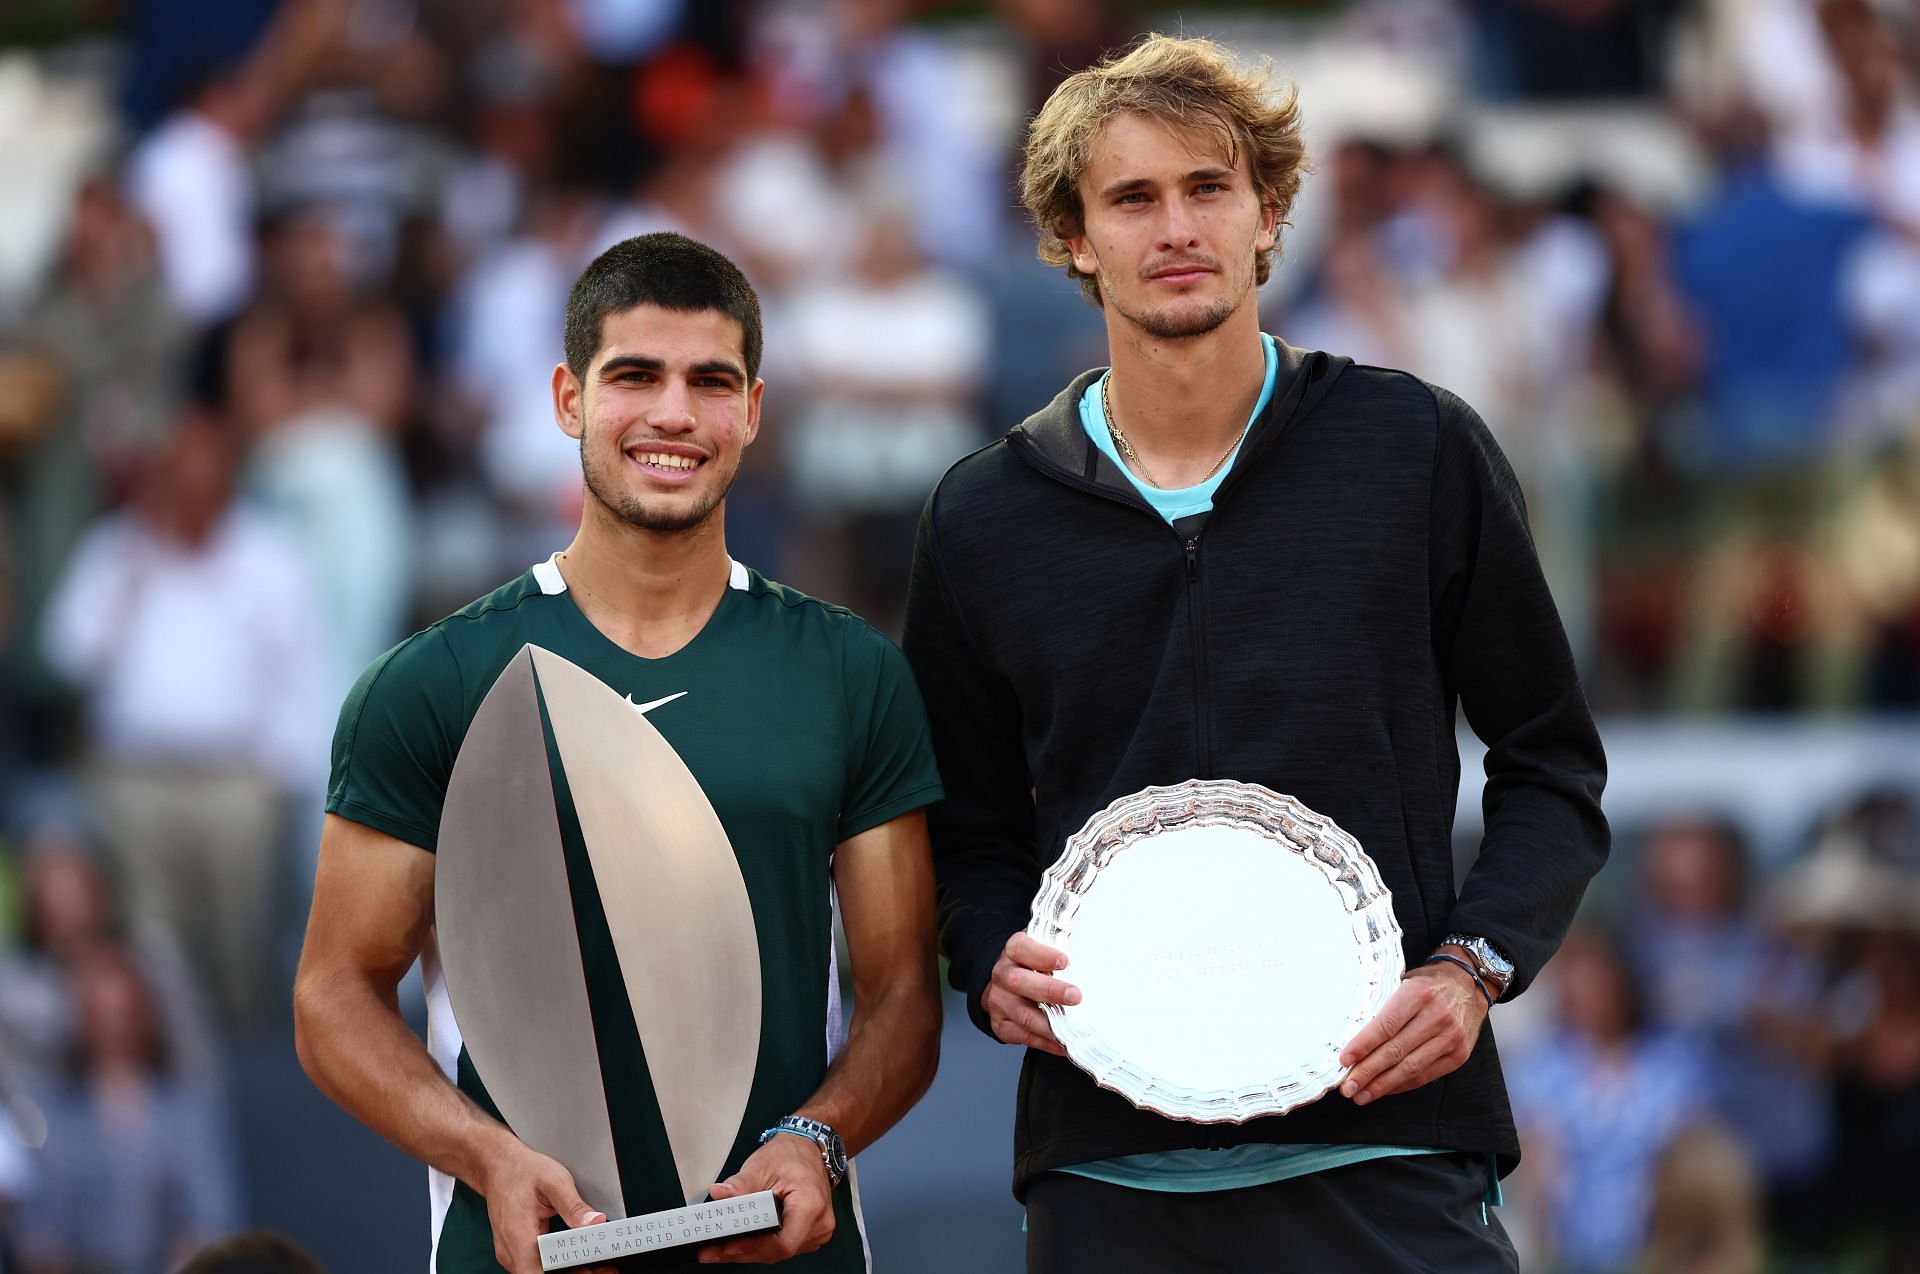 Carlos Alcaraz (left) is all smiles after winning the Madrid title.